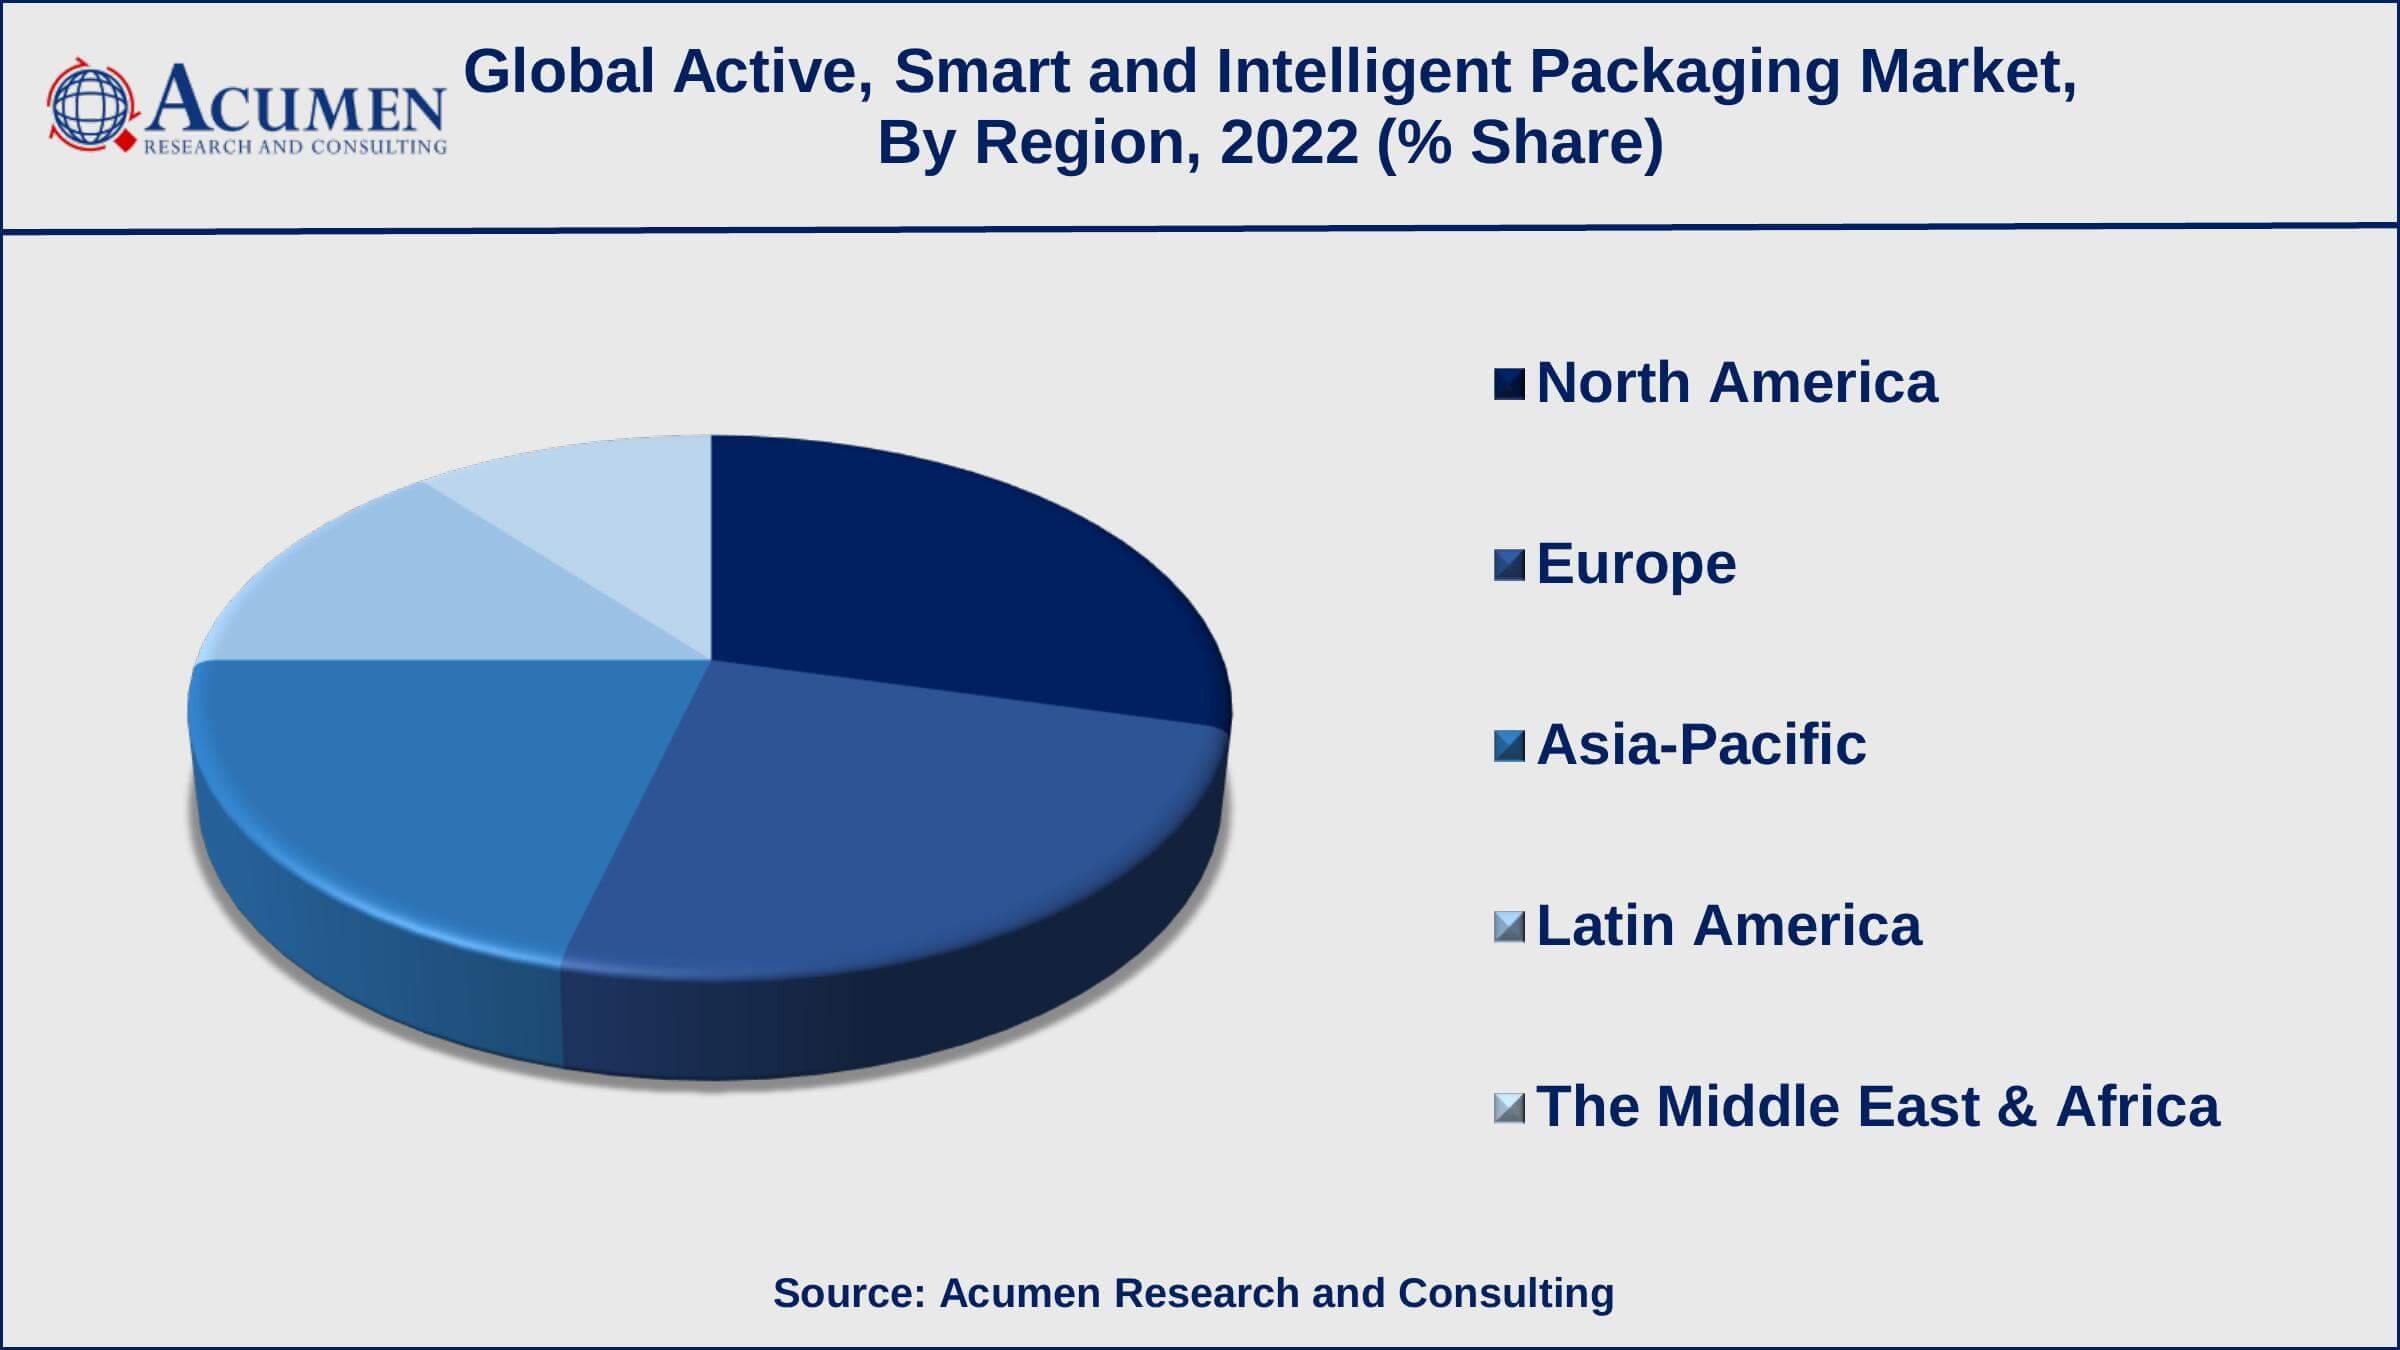 Active, Smart and Intelligent Packaging Market Growth Factors